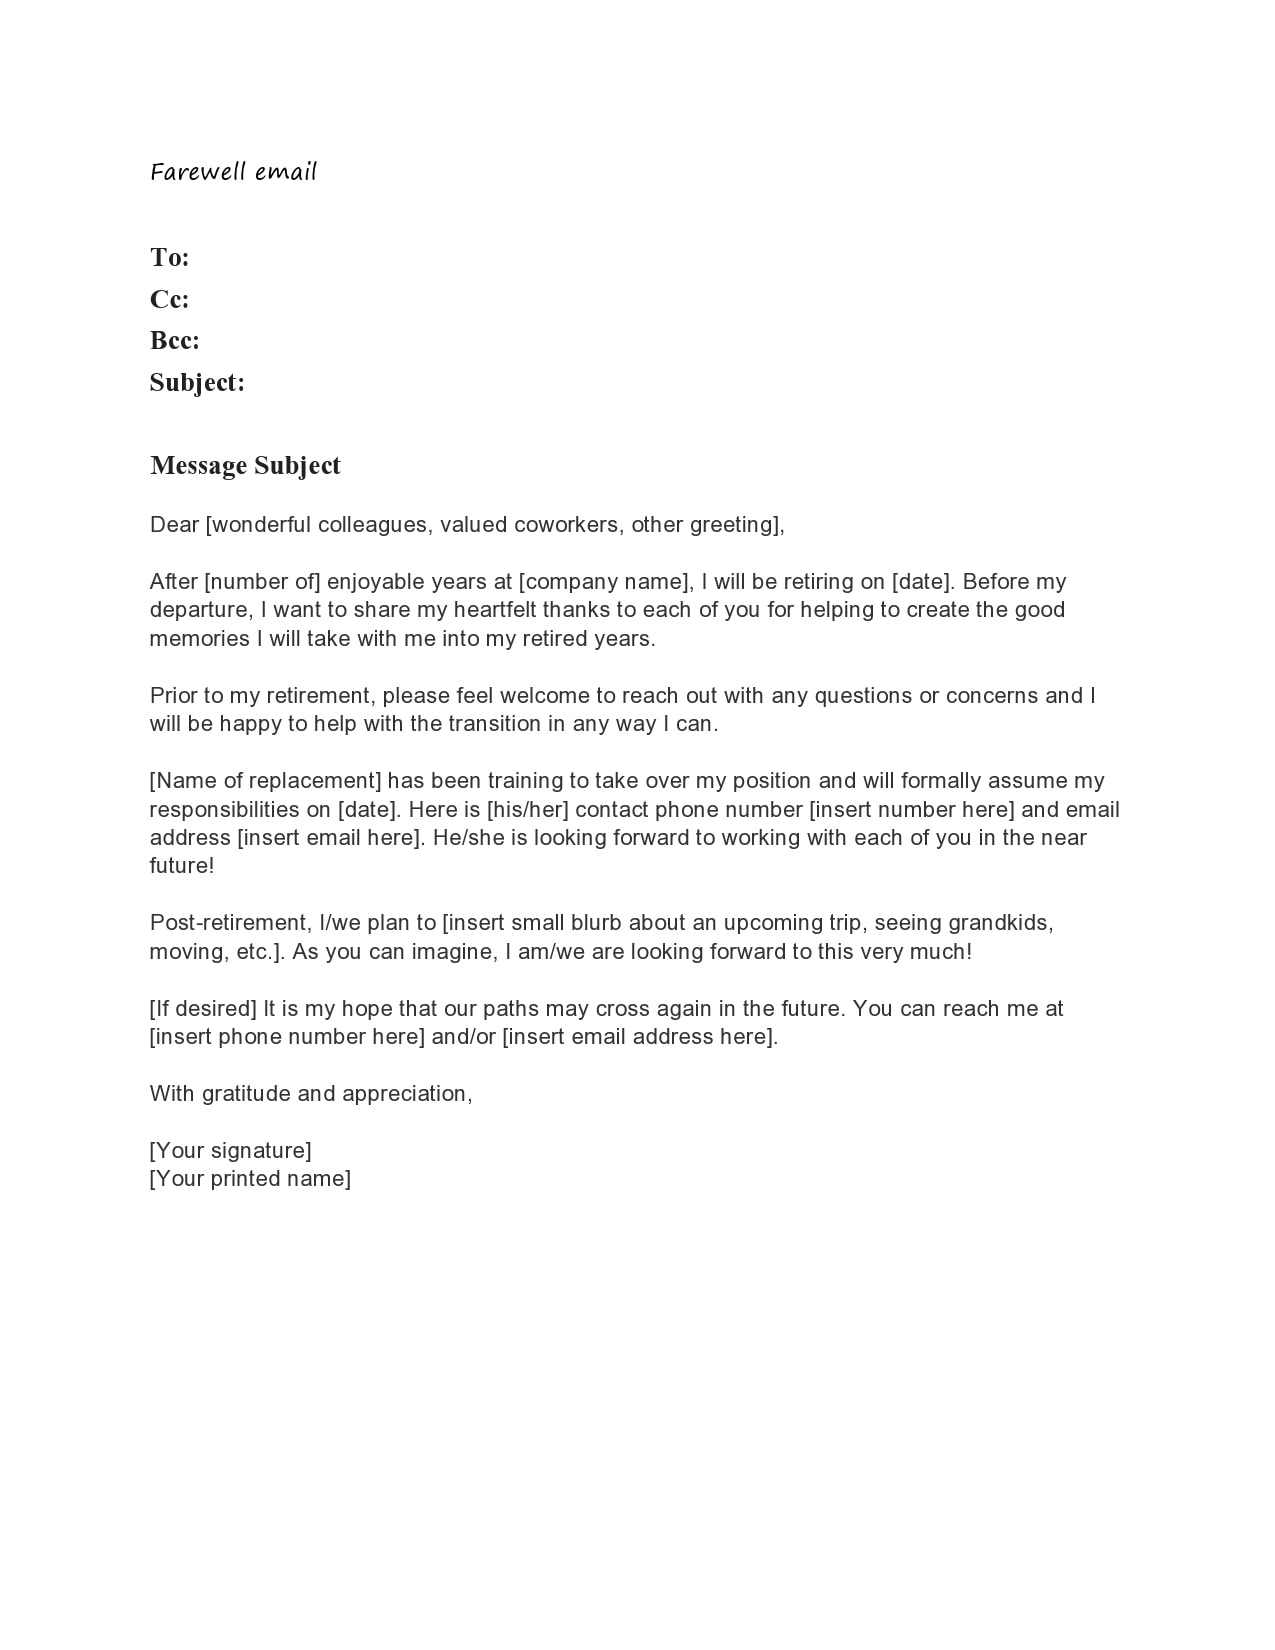 Farewell Letter To Customers from templatearchive.com